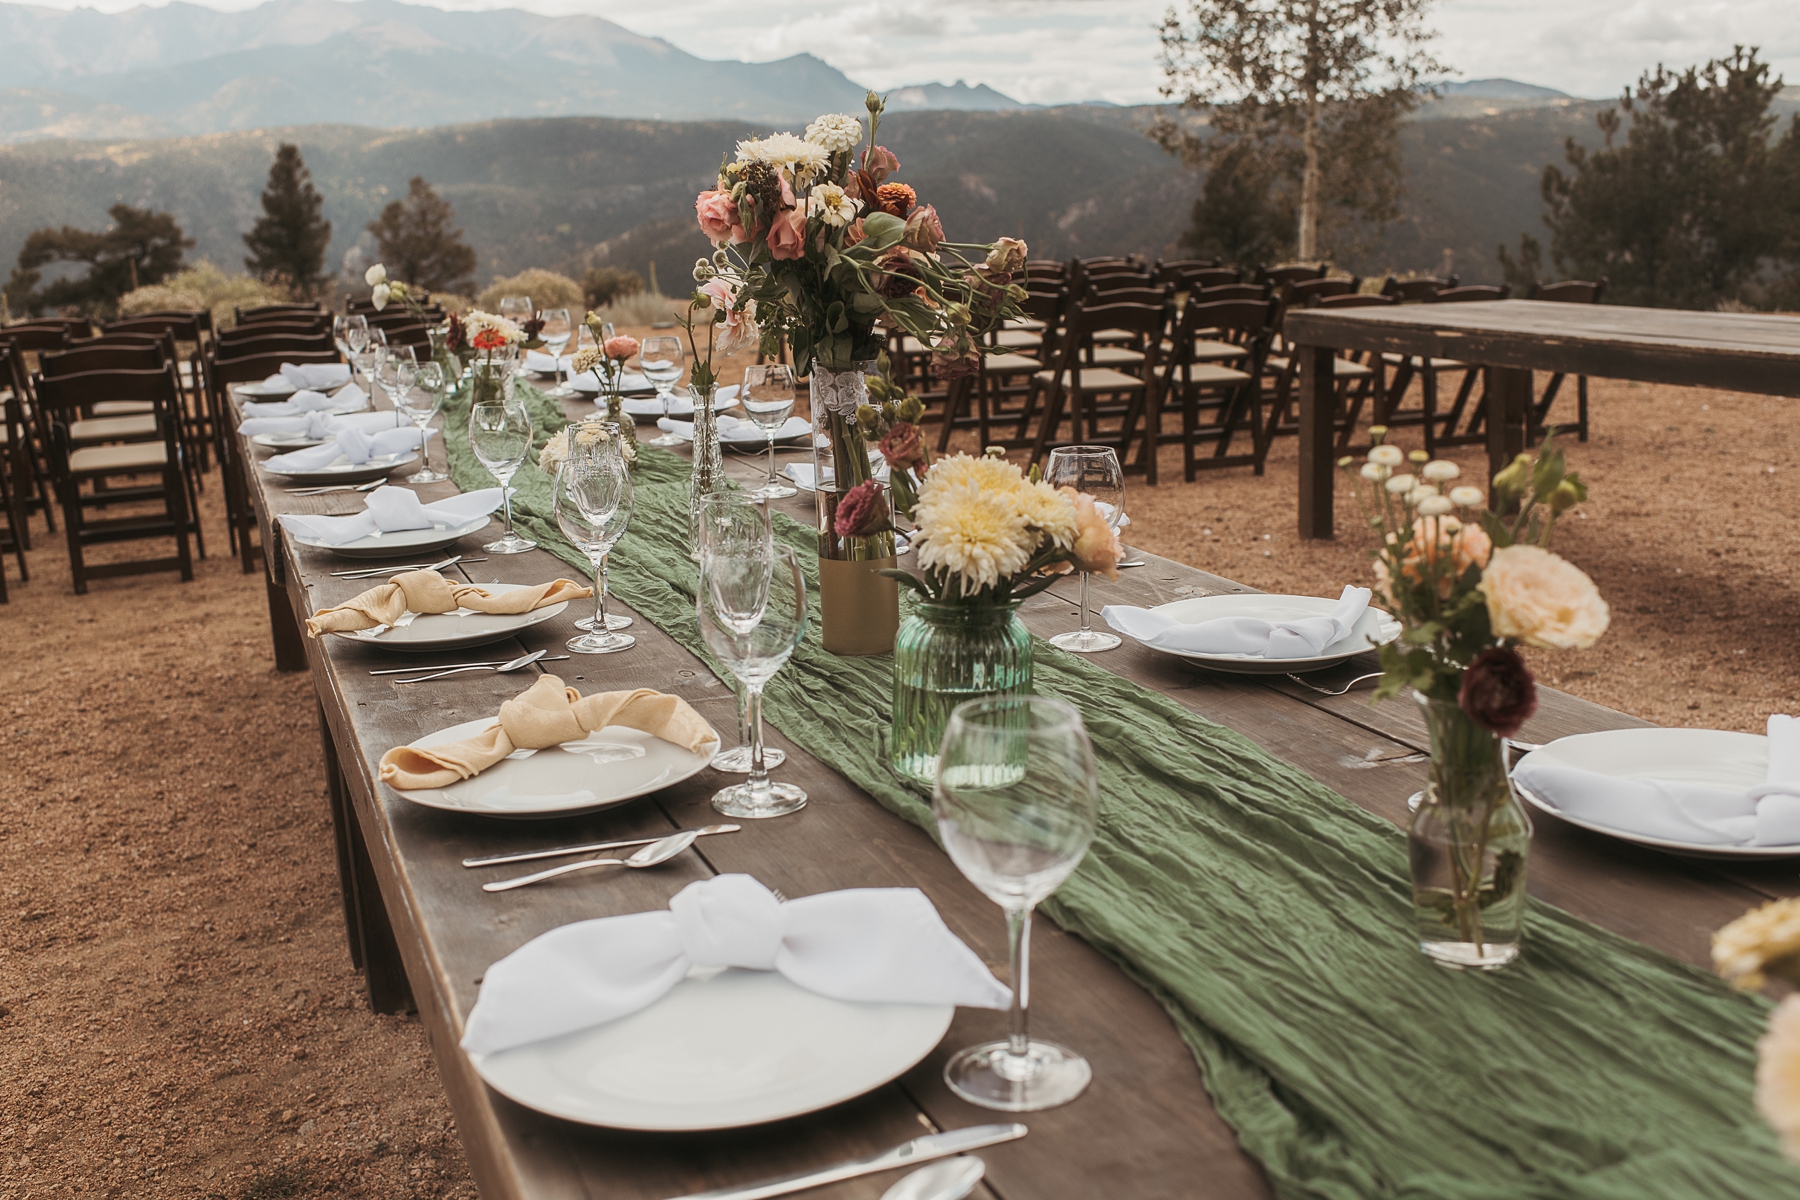 Farmhouse table with assorted pink and white flowers at Airbnb wedding venue in Colorado